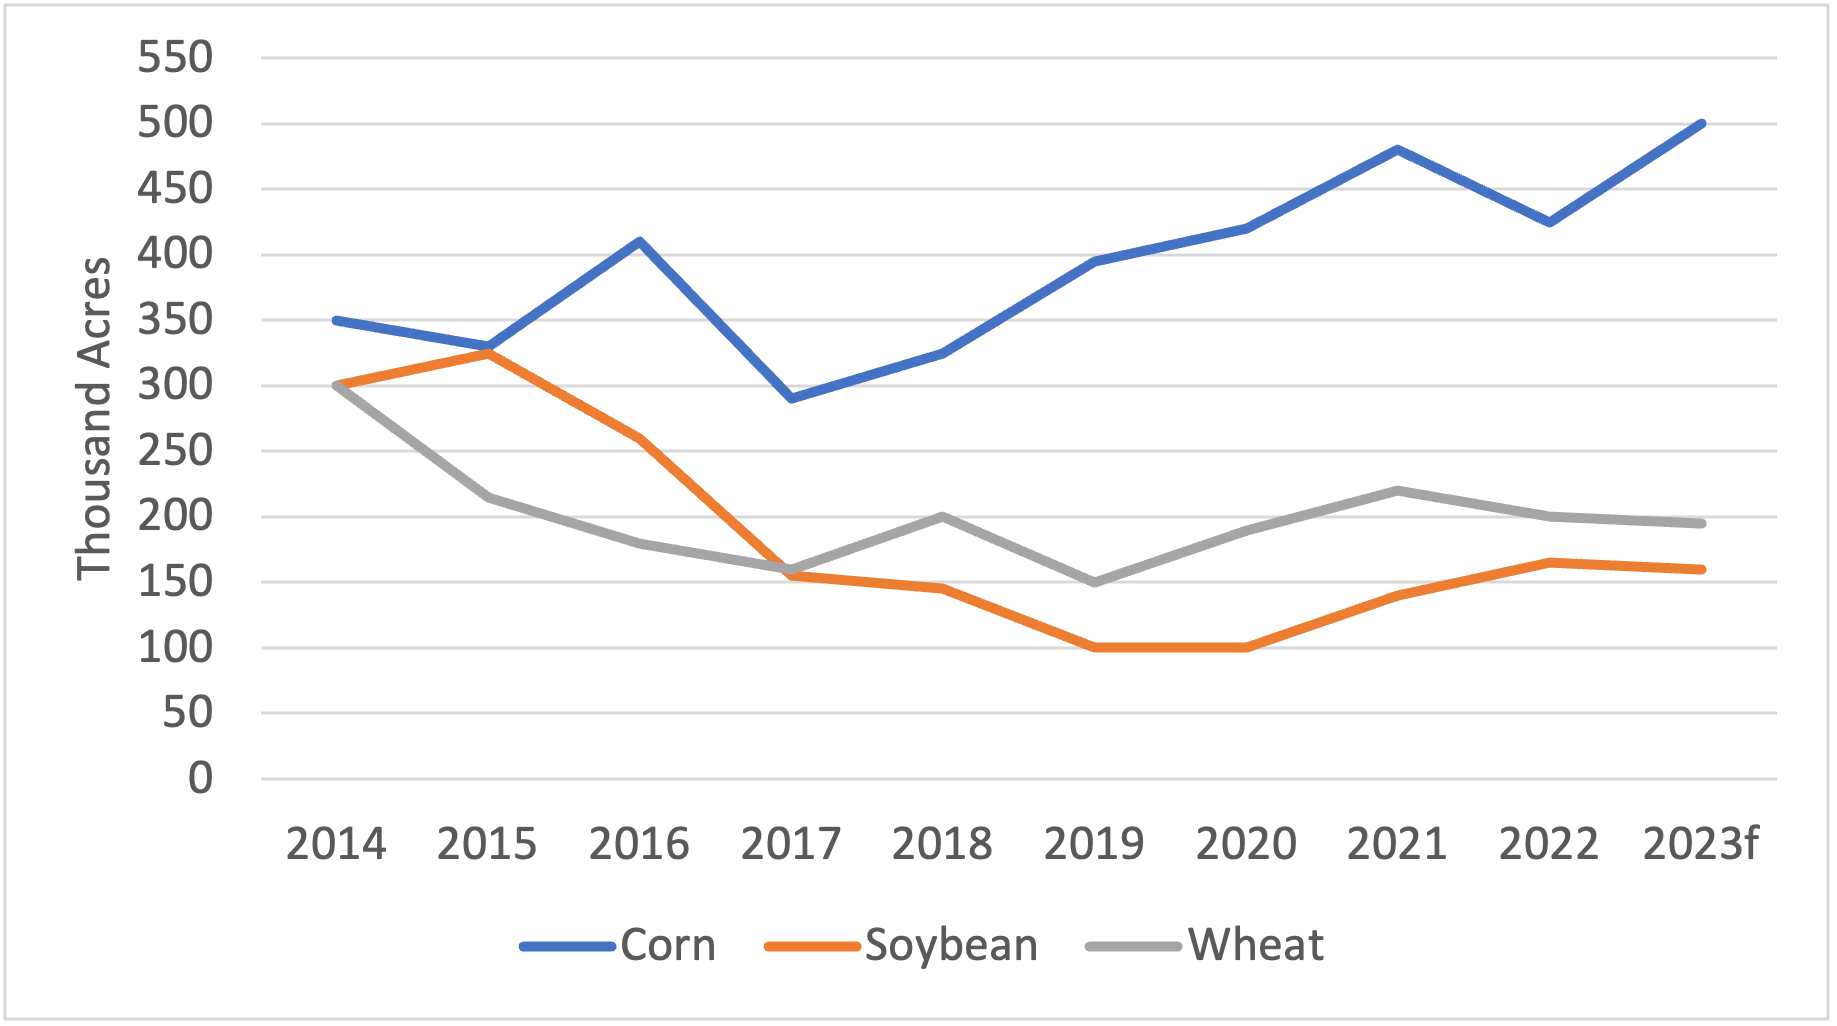 Planted acres of corn, soybeans, and wheat in Georgia show a steady overall increase in corn from 350,000 acres in 2014 to 500,000 acres forecast for 2023; both soybeans and wheat show steady declines from the same time period, with both starting at about 300,000 acres in 2014 and declining to about 200,000 acres of wheat and about 150,000 acres of soybeans.